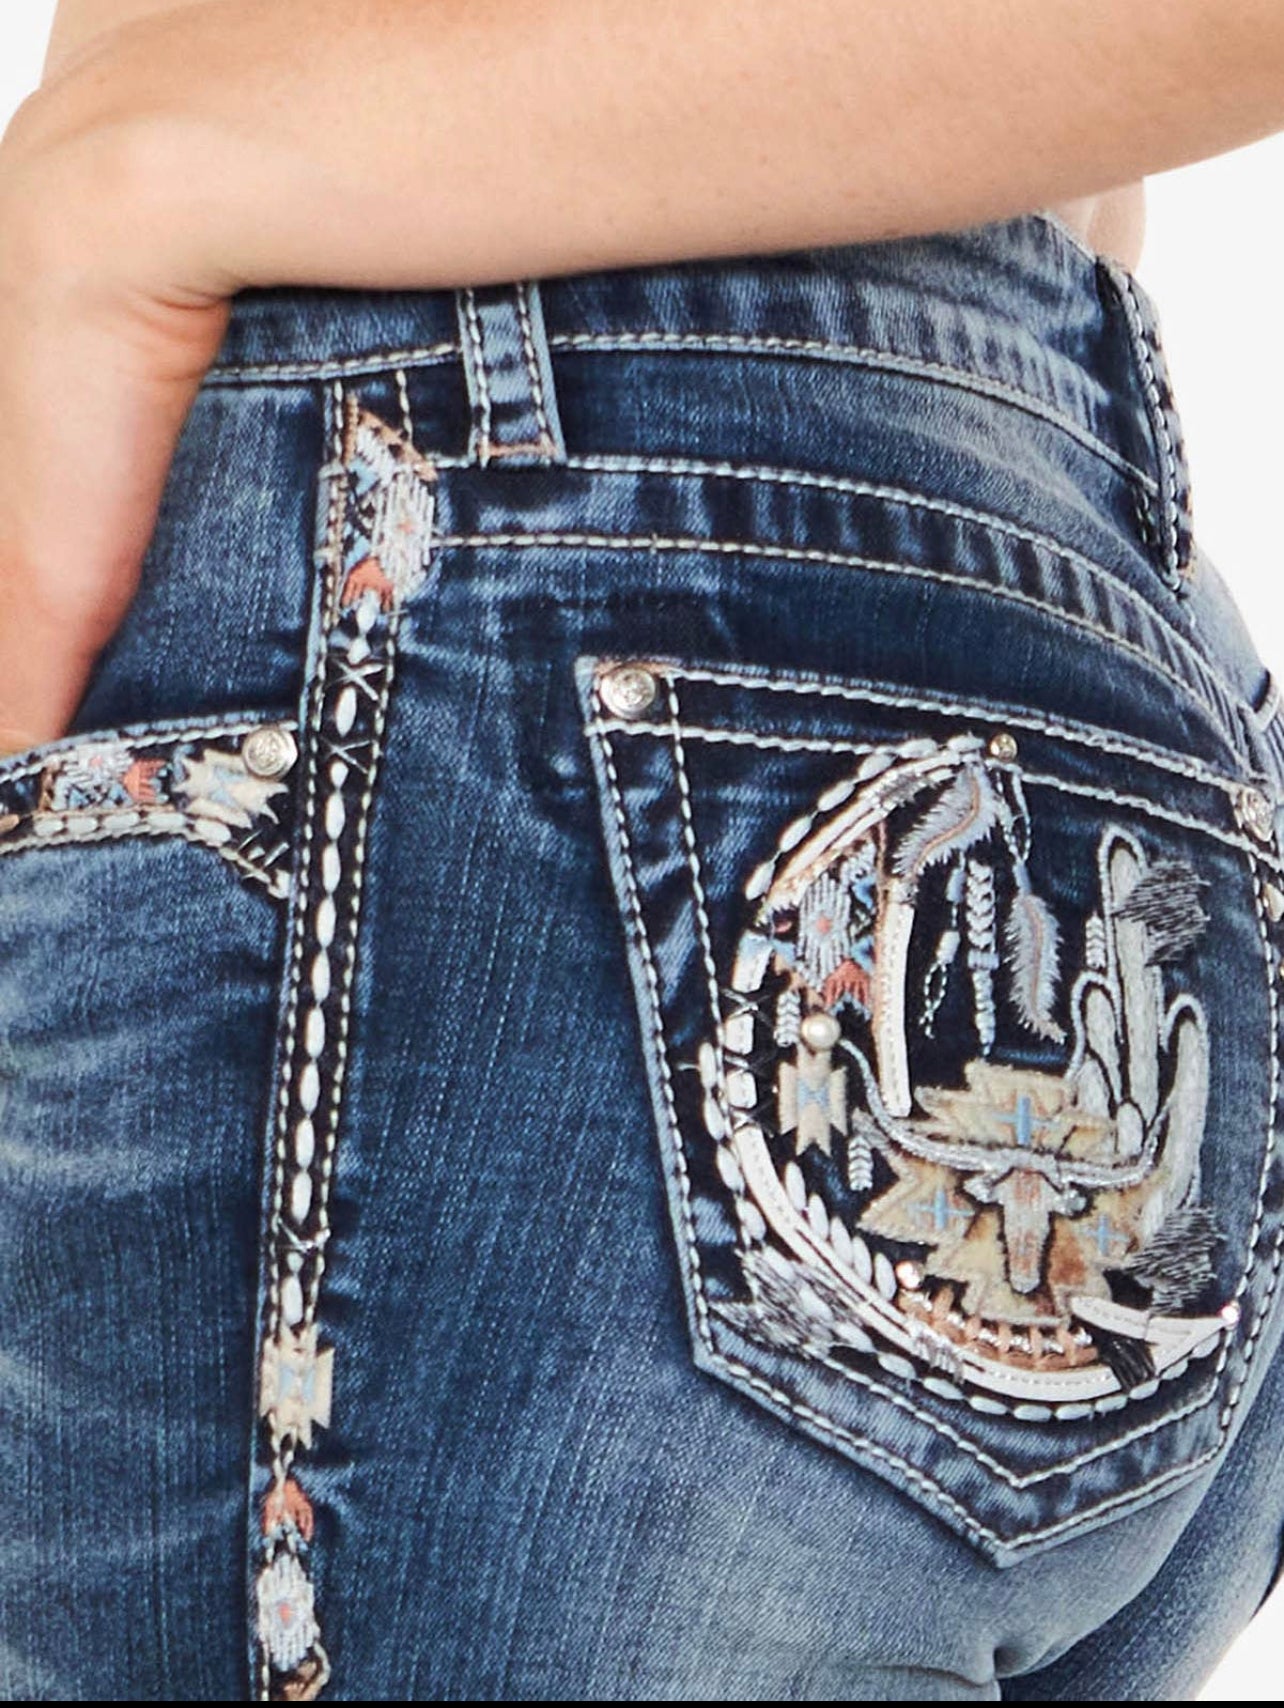 Moon embroidery girl boot cut jeans